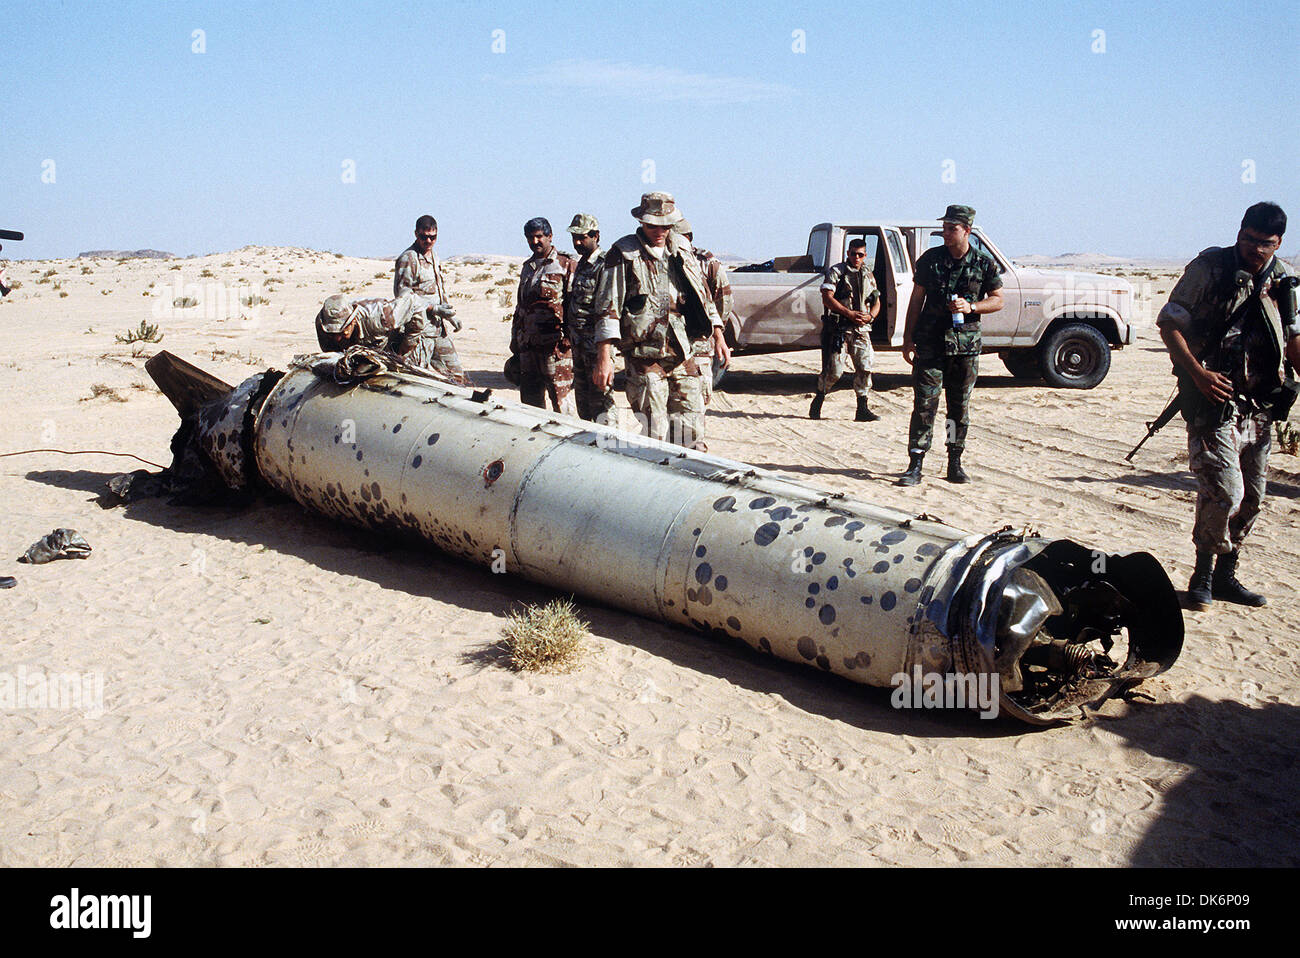 https://c8.alamy.com/comp/DK6P09/military-personnel-examine-an-iraqi-scud-missile-shot-down-in-the-DK6P09.jpg